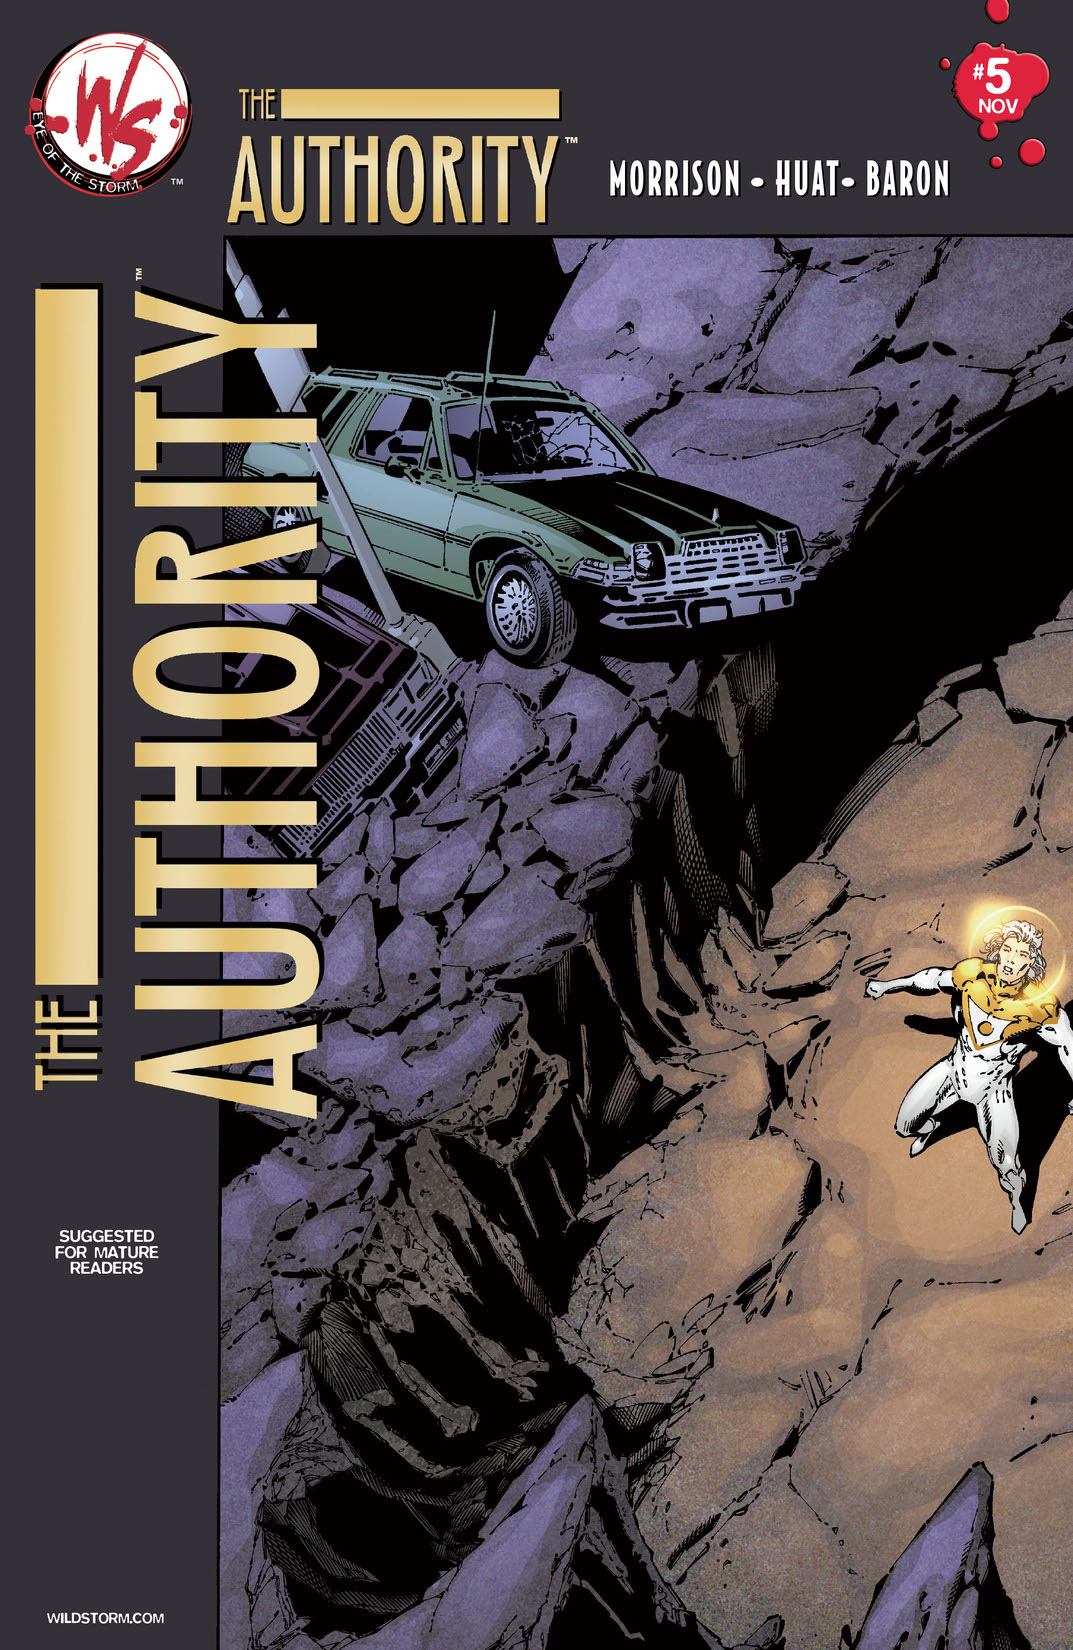 The Authority (2003-2004) #5 preview images